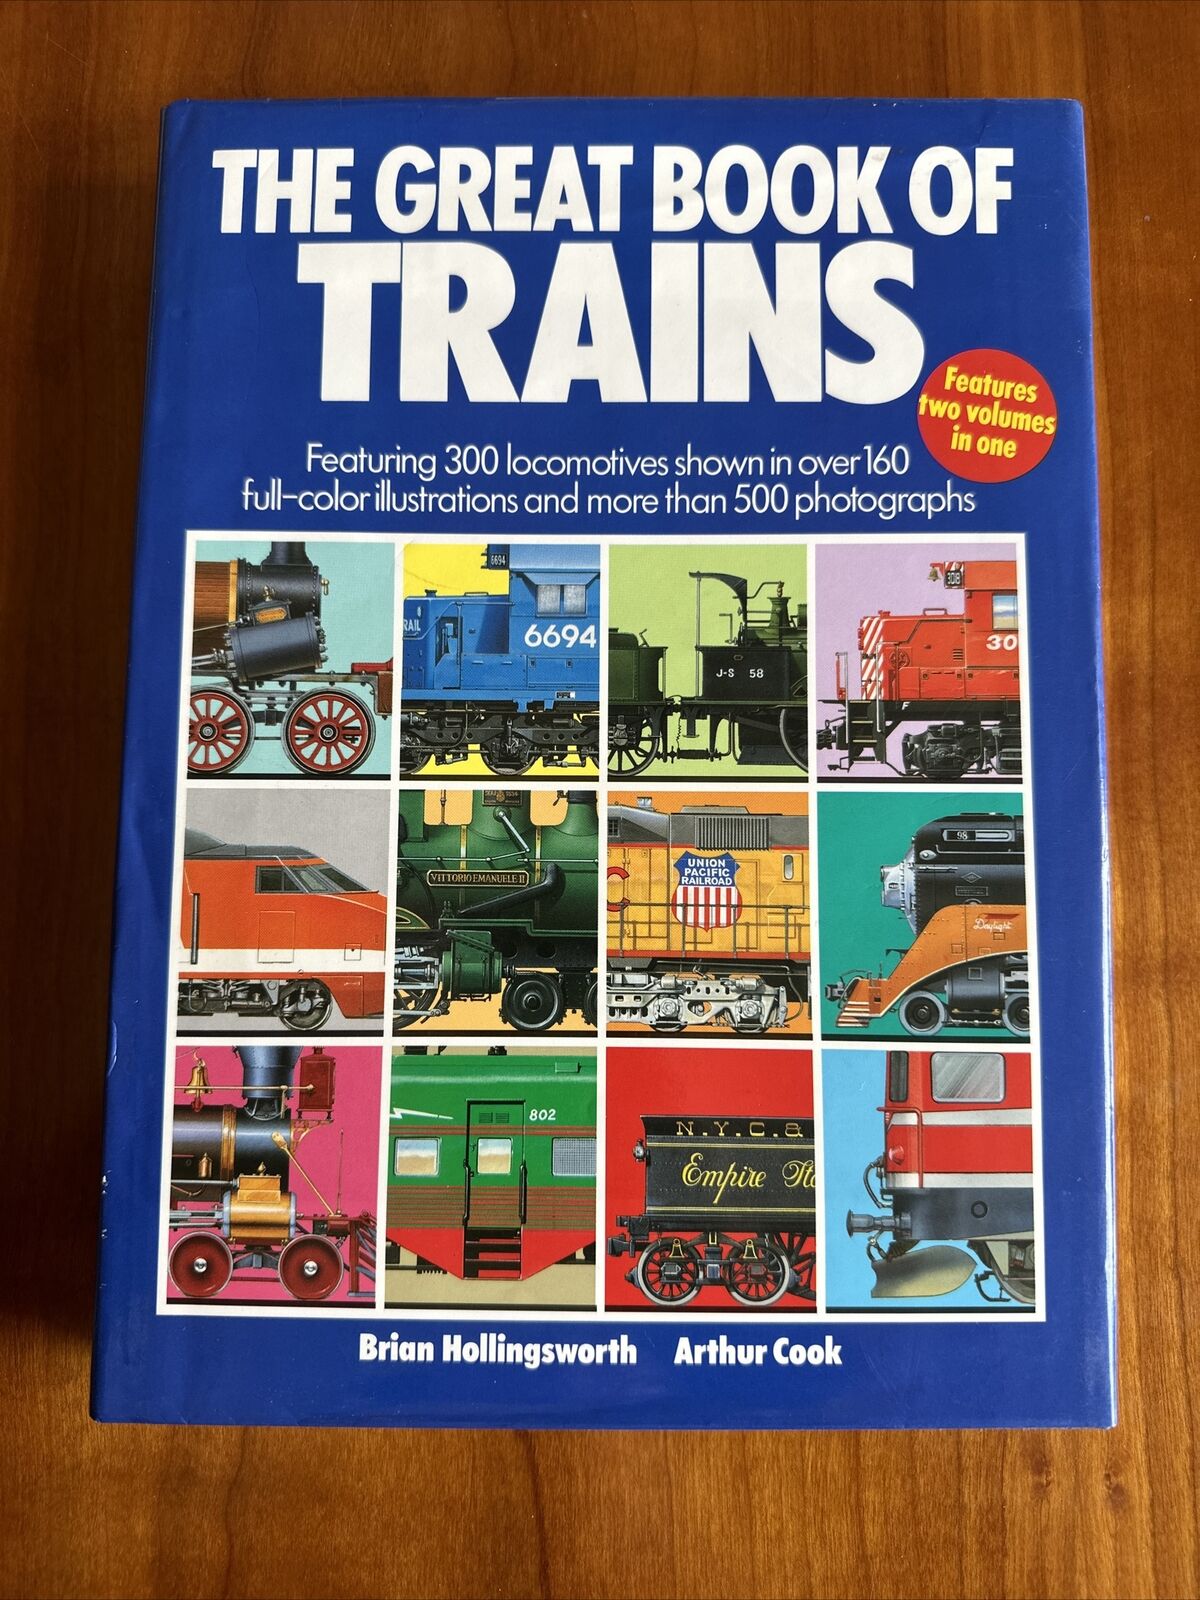 The Great Book of Trains by Brian Hollingsworth and Arthur Cook 1987